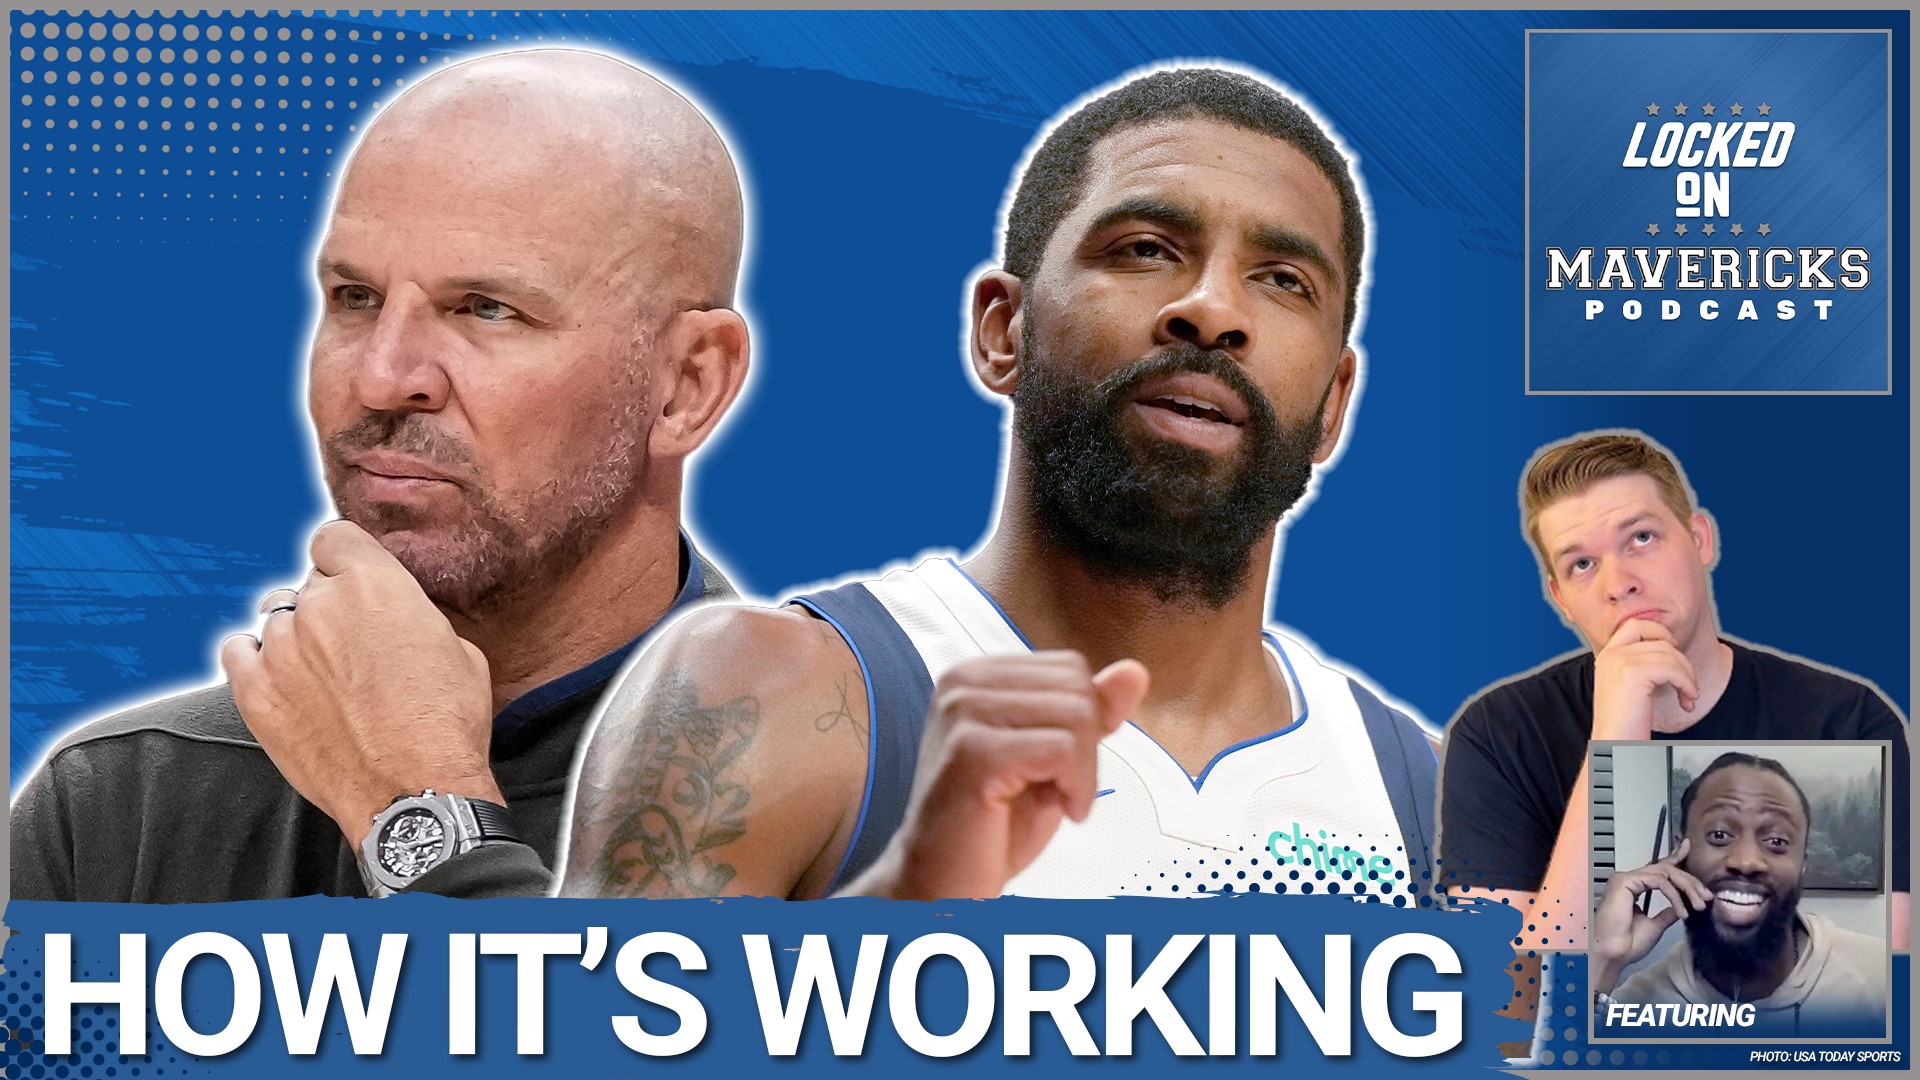 Nick Angstadt & Reggie Adetula discuss Kyrie Irving’s comments about playing in Dallas, why it's worked, and how Jason Kidd accepts failure for the Dallas Mavericks.